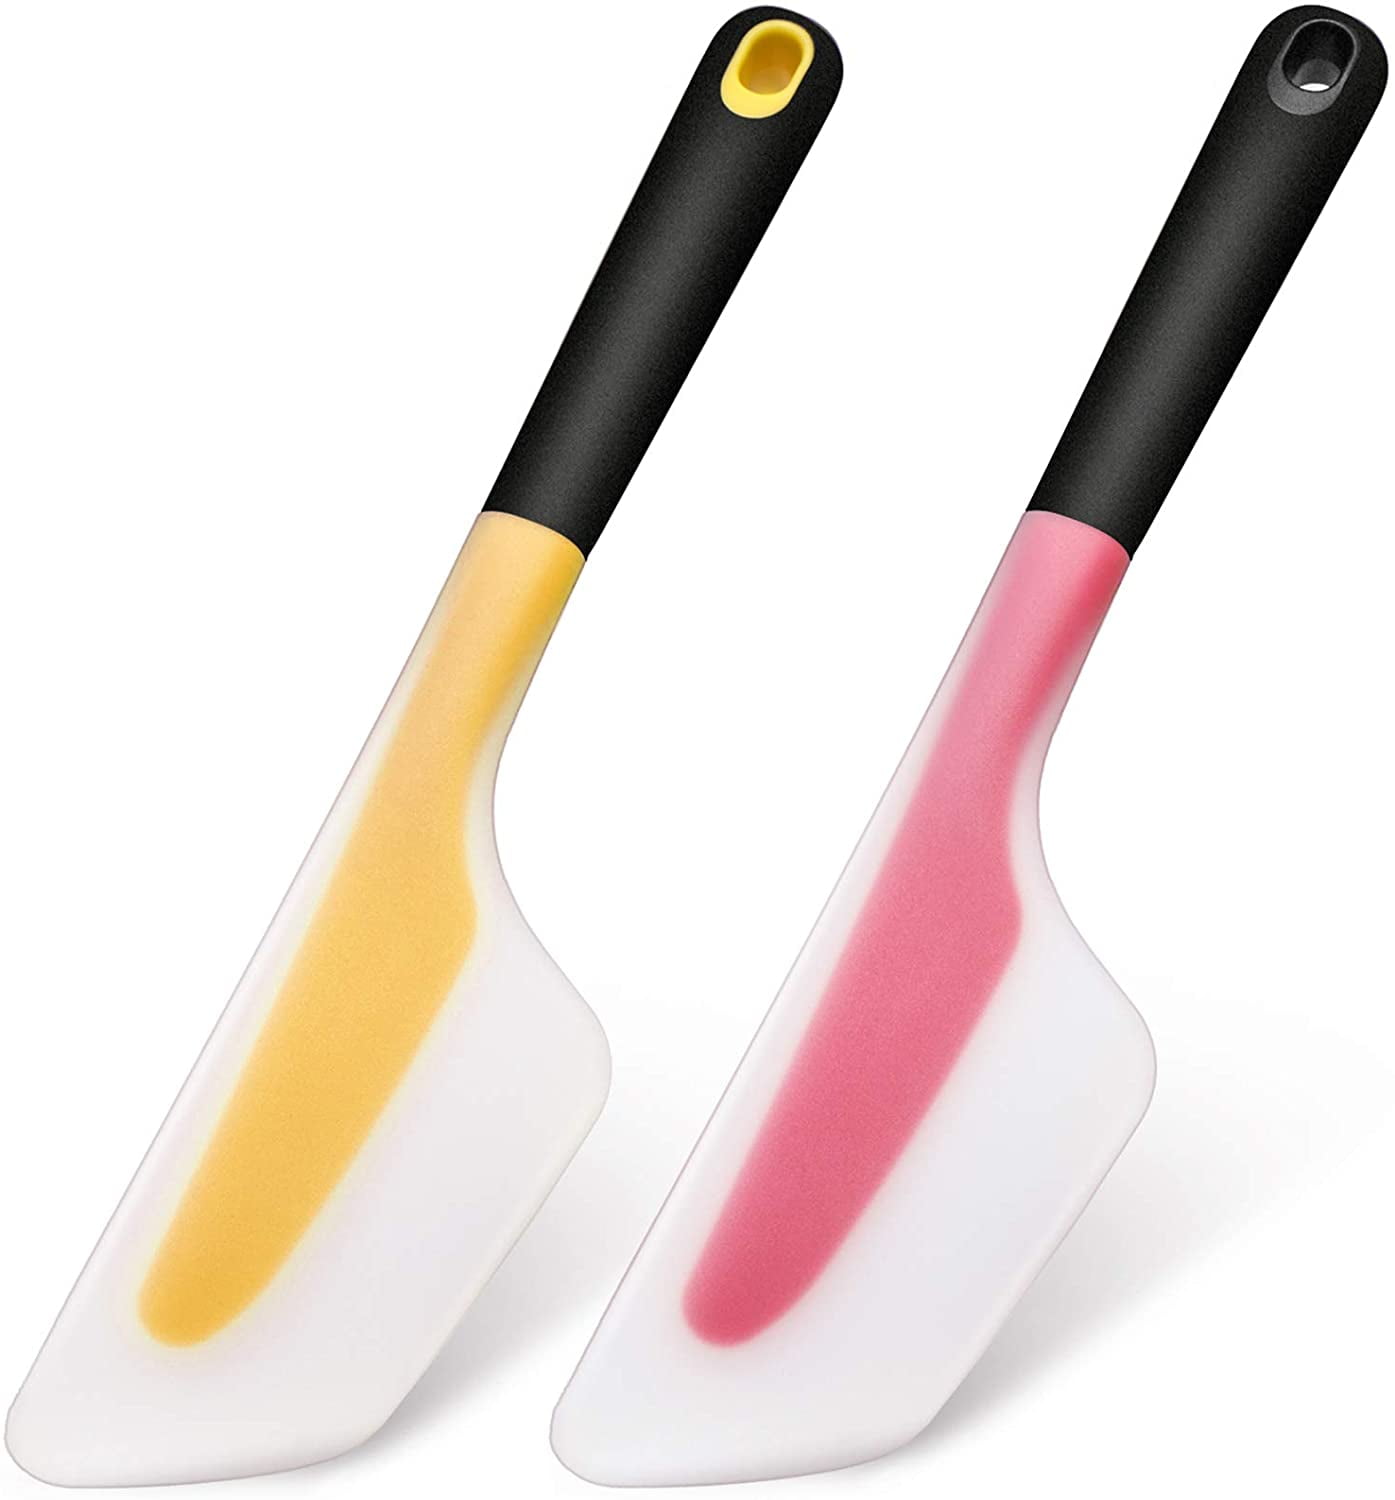 Silicone Turner Spatula,The Perfect Pancake Flipper, Egg Turner, and Omelet  Spatula,Heat Resistant R…See more Silicone Turner Spatula,The Perfect